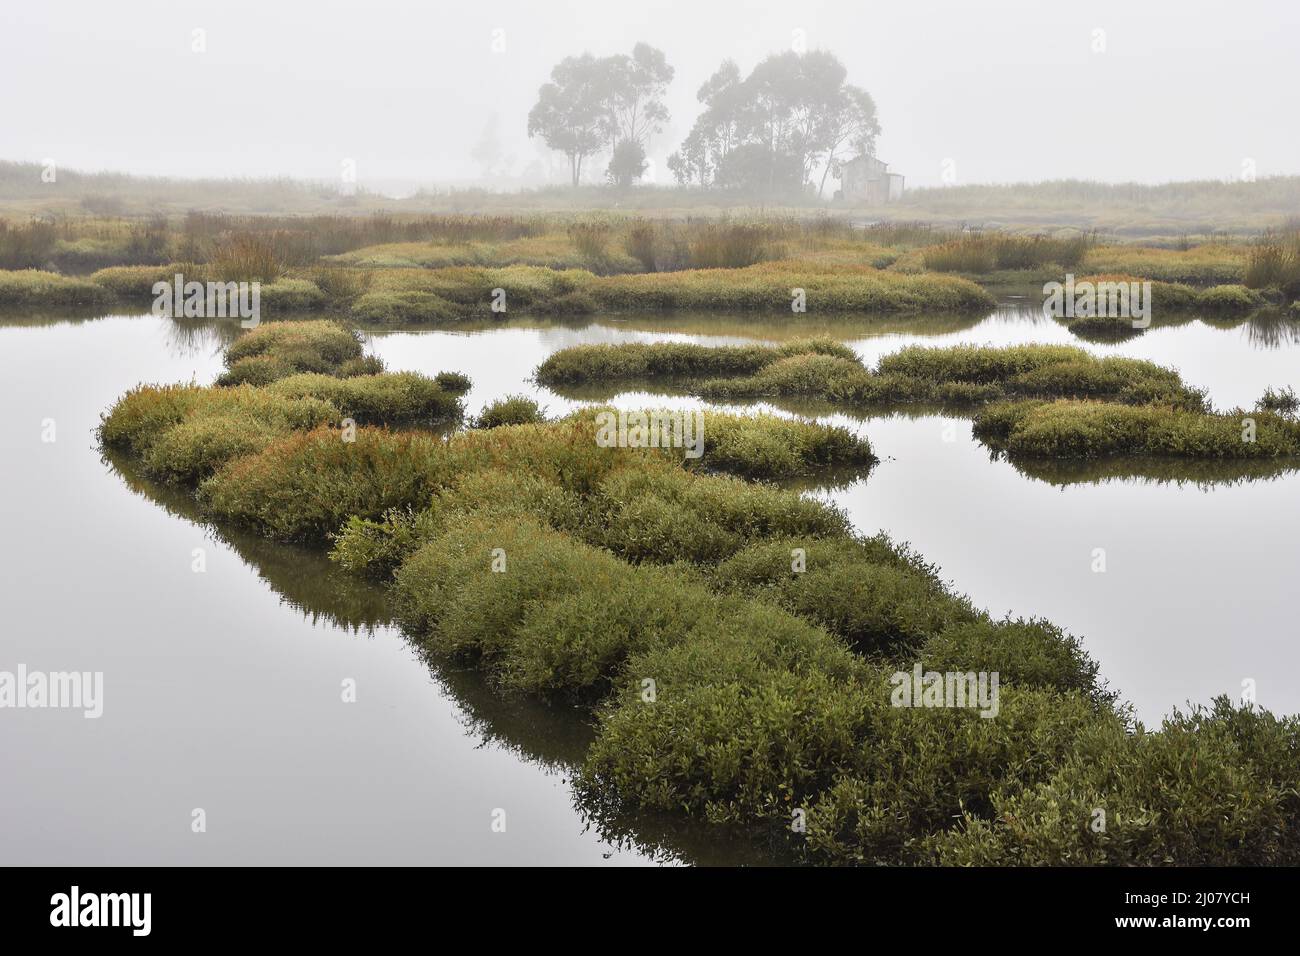 Grassy wetlands area with sea purslane (Halimione portulacoides) plants, foggy weather in Aveiro Portugal. Stock Photo